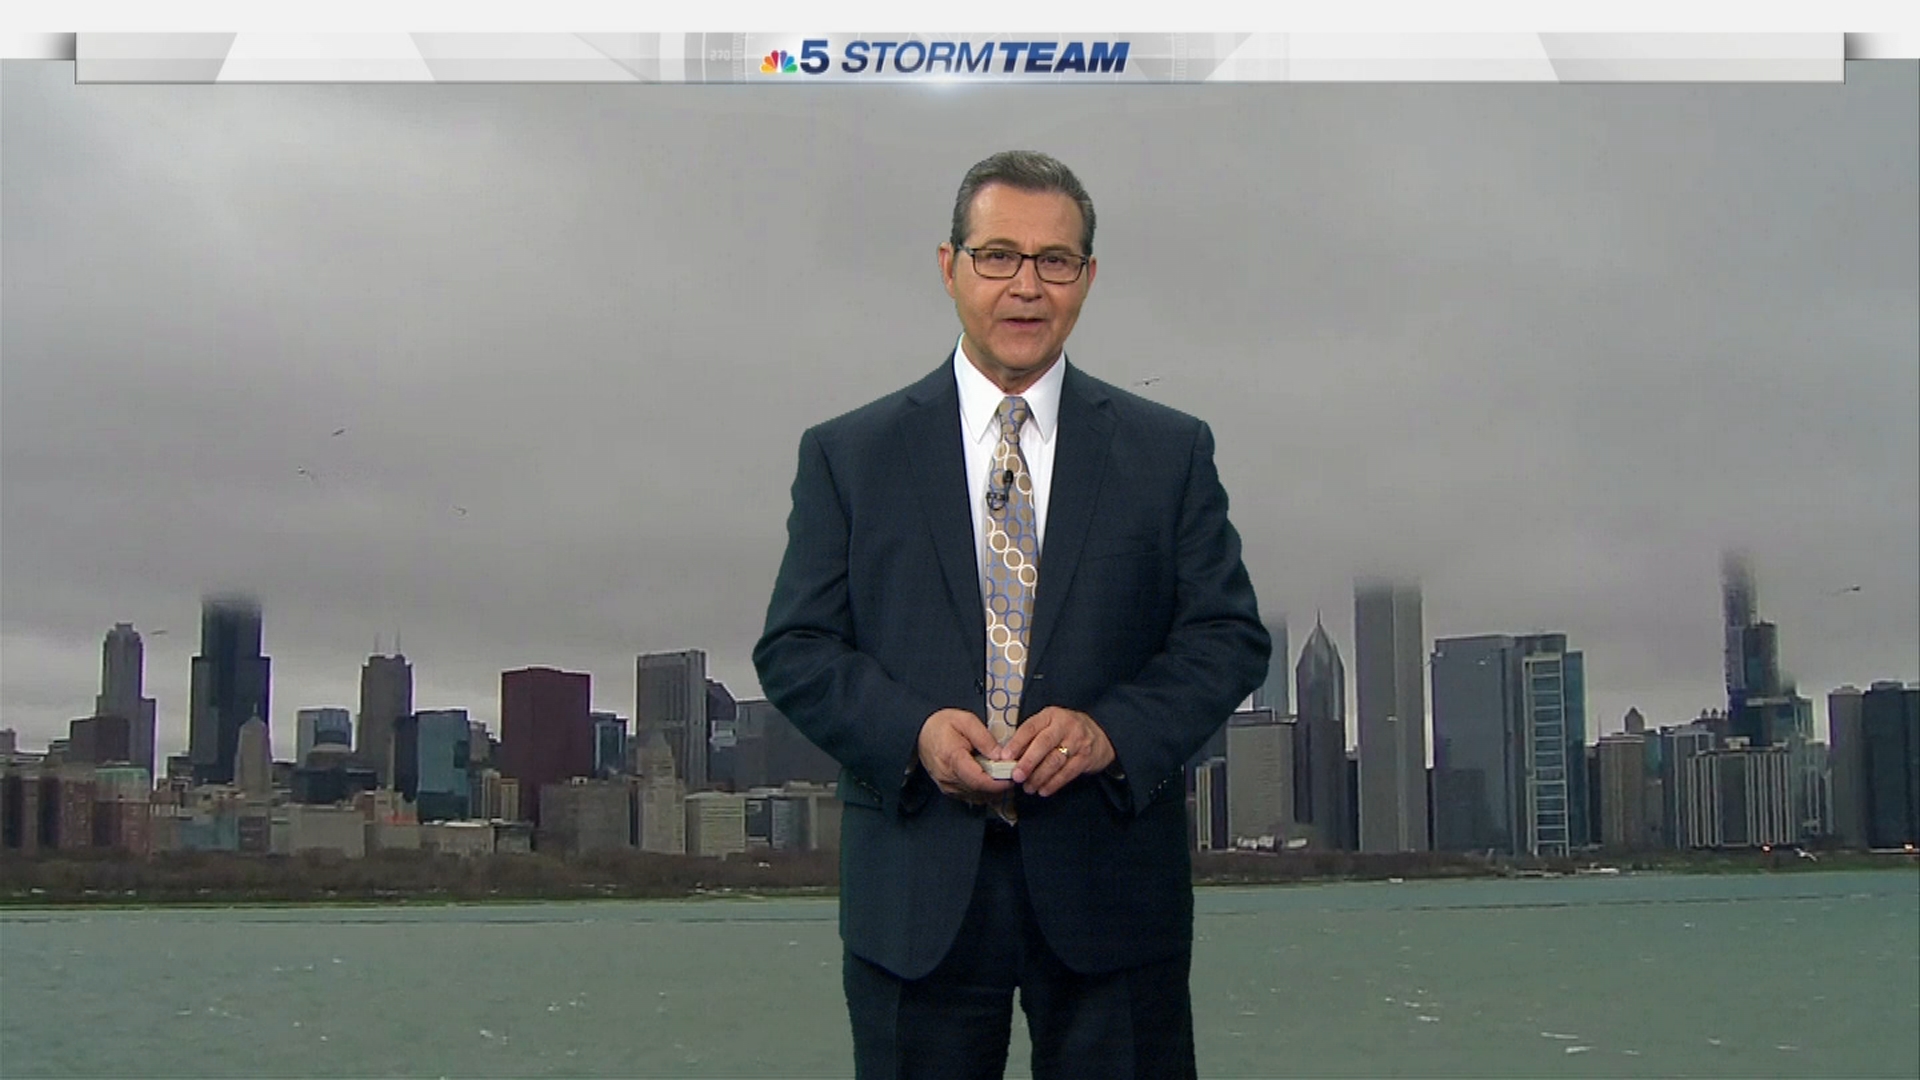 Chicago Weather Forecast: A Blustery Day